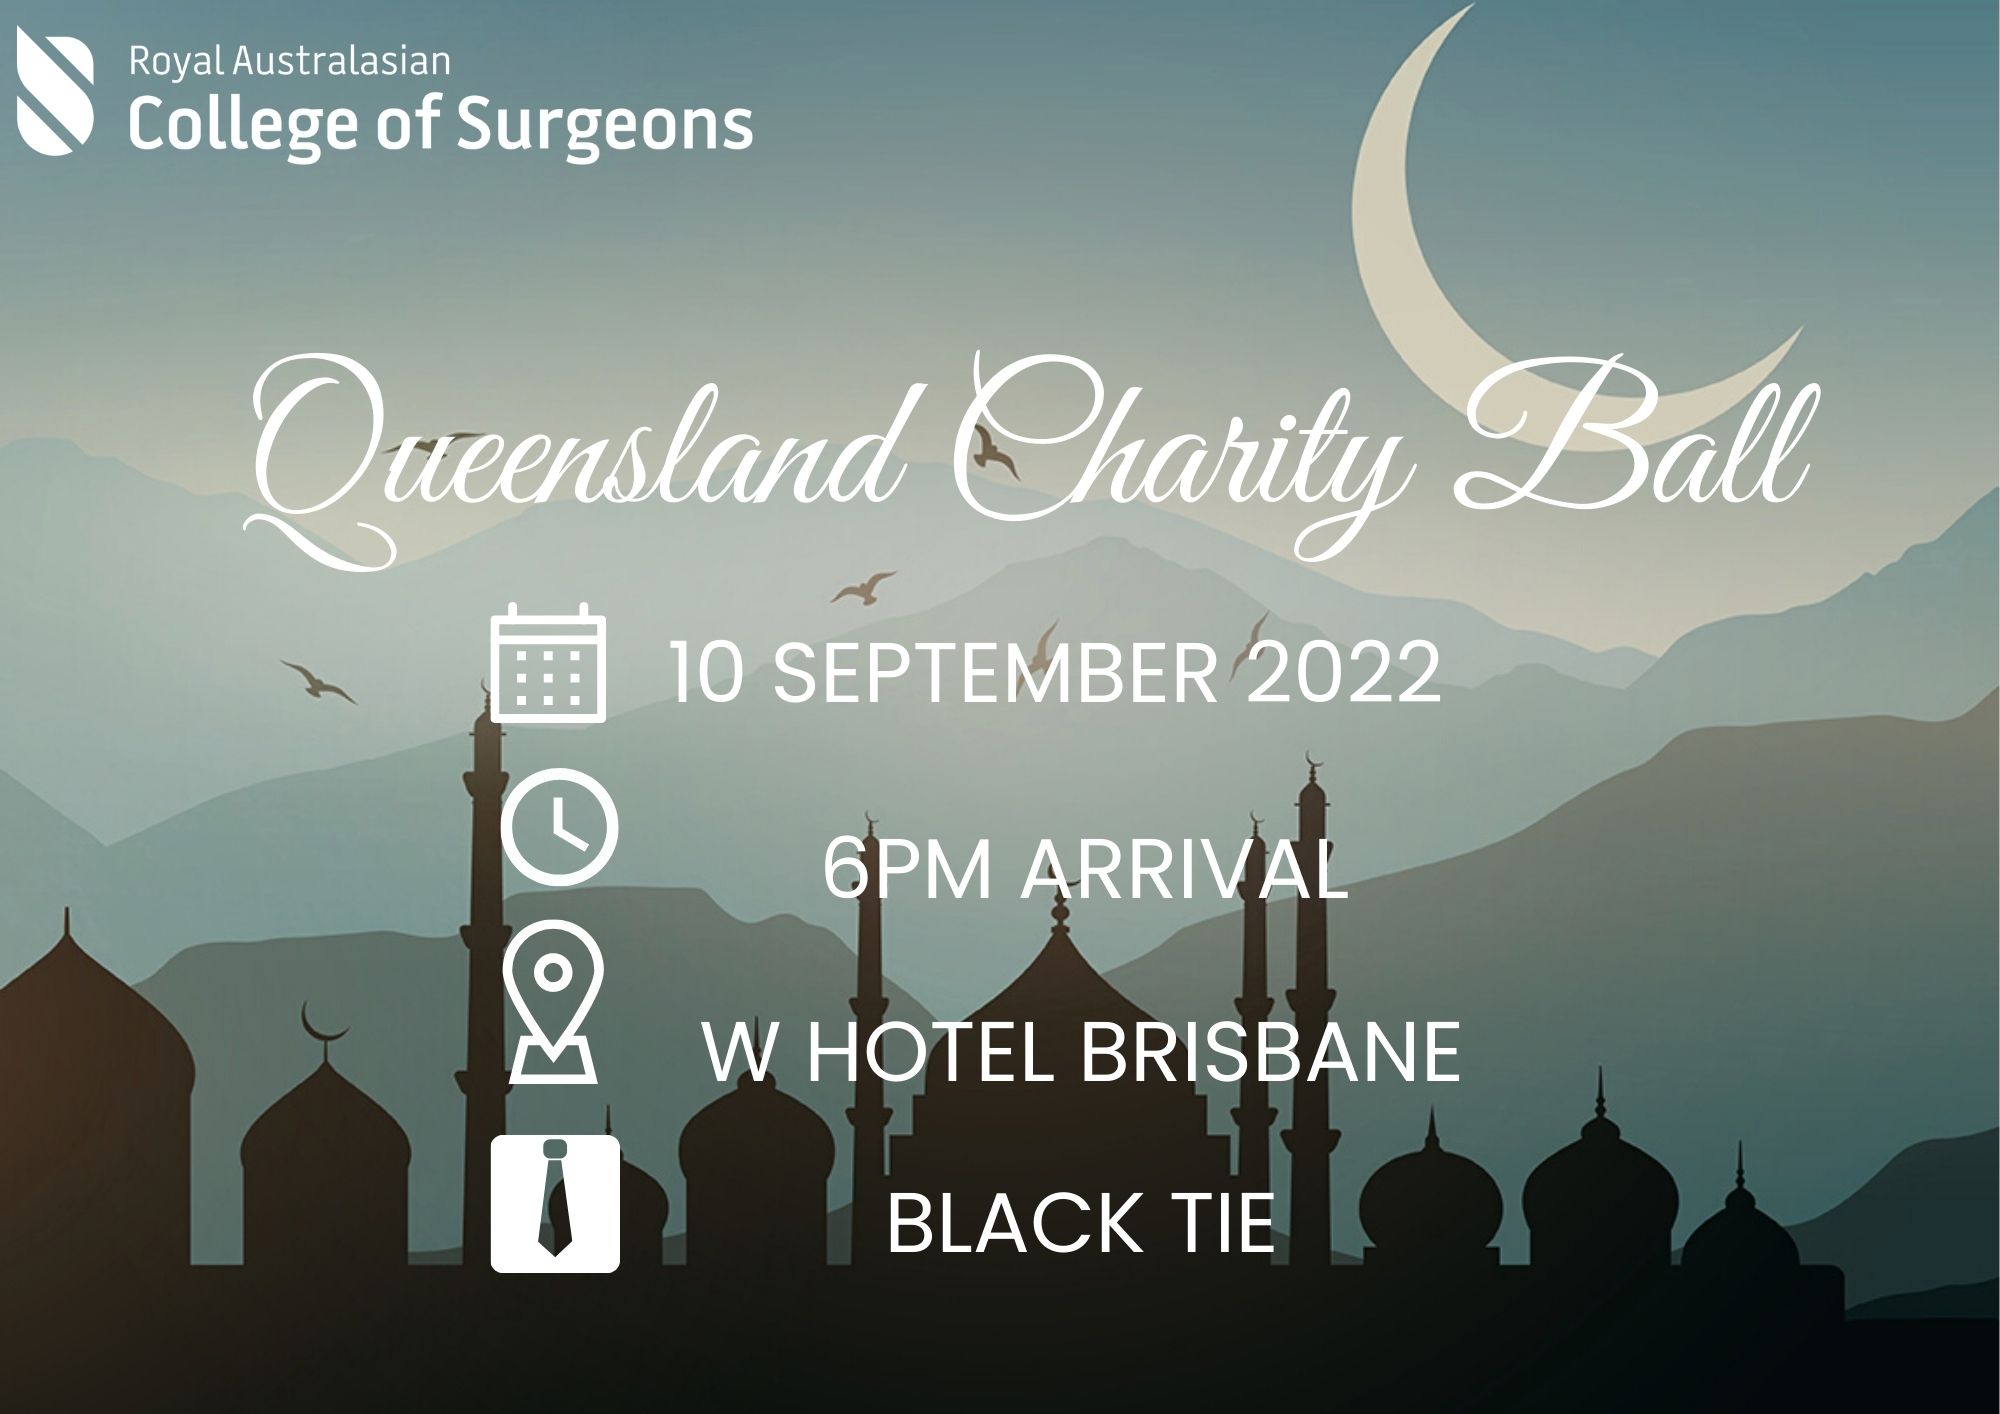 Invitation tile for the Queensland Charity Ball